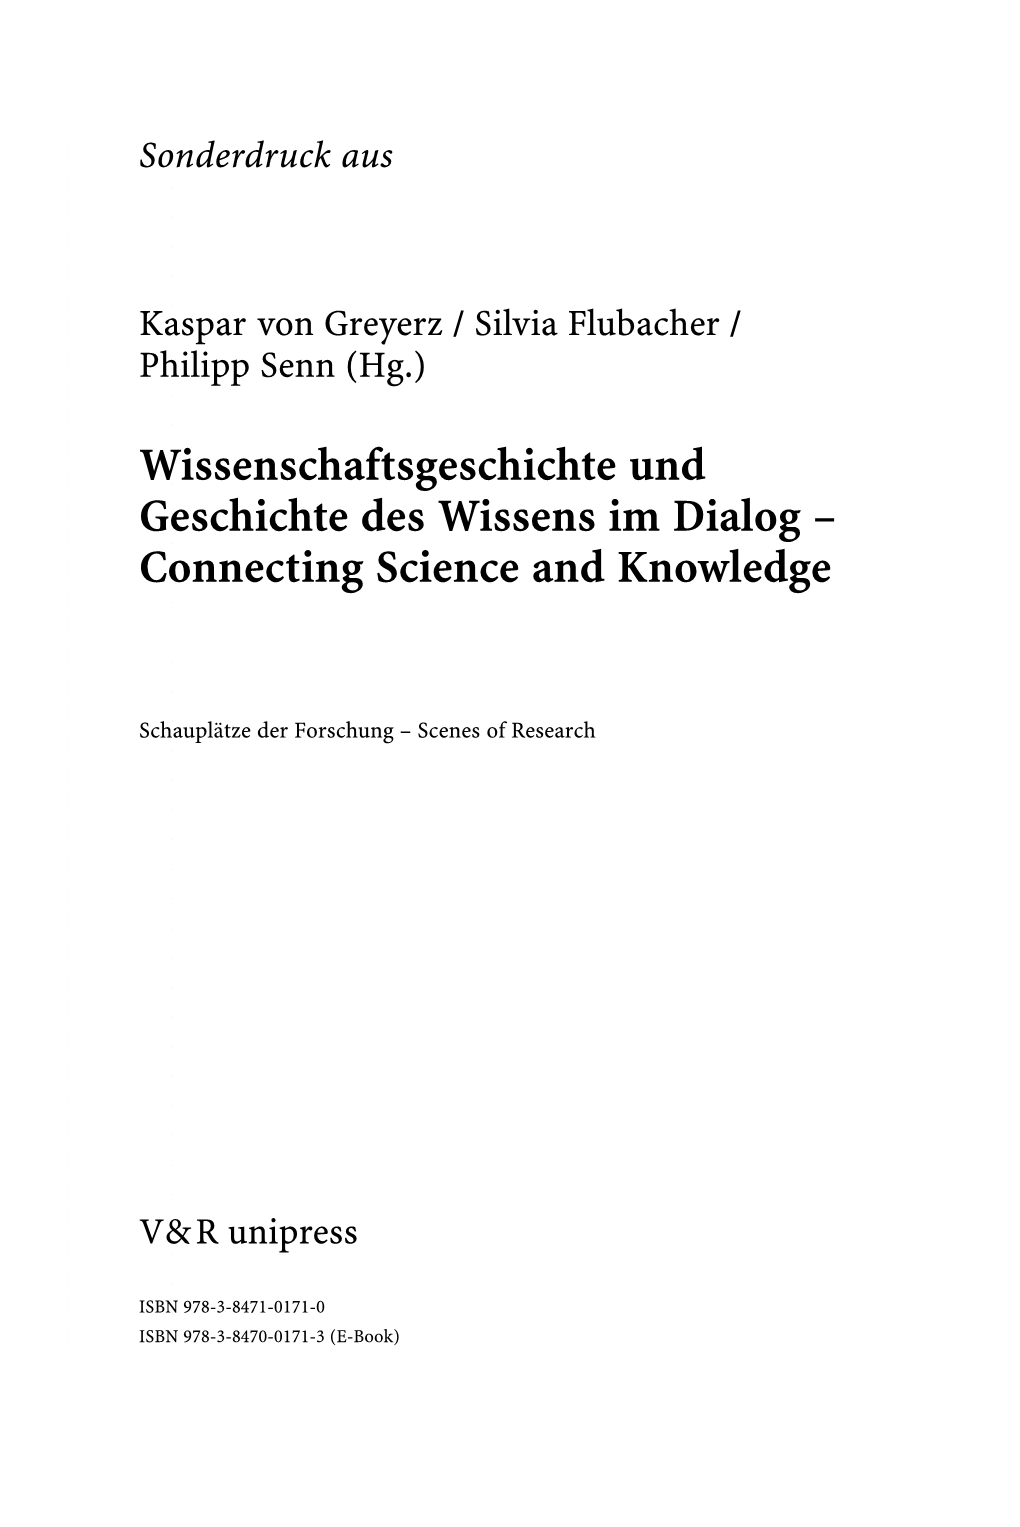 Connecting Science and Knowledge